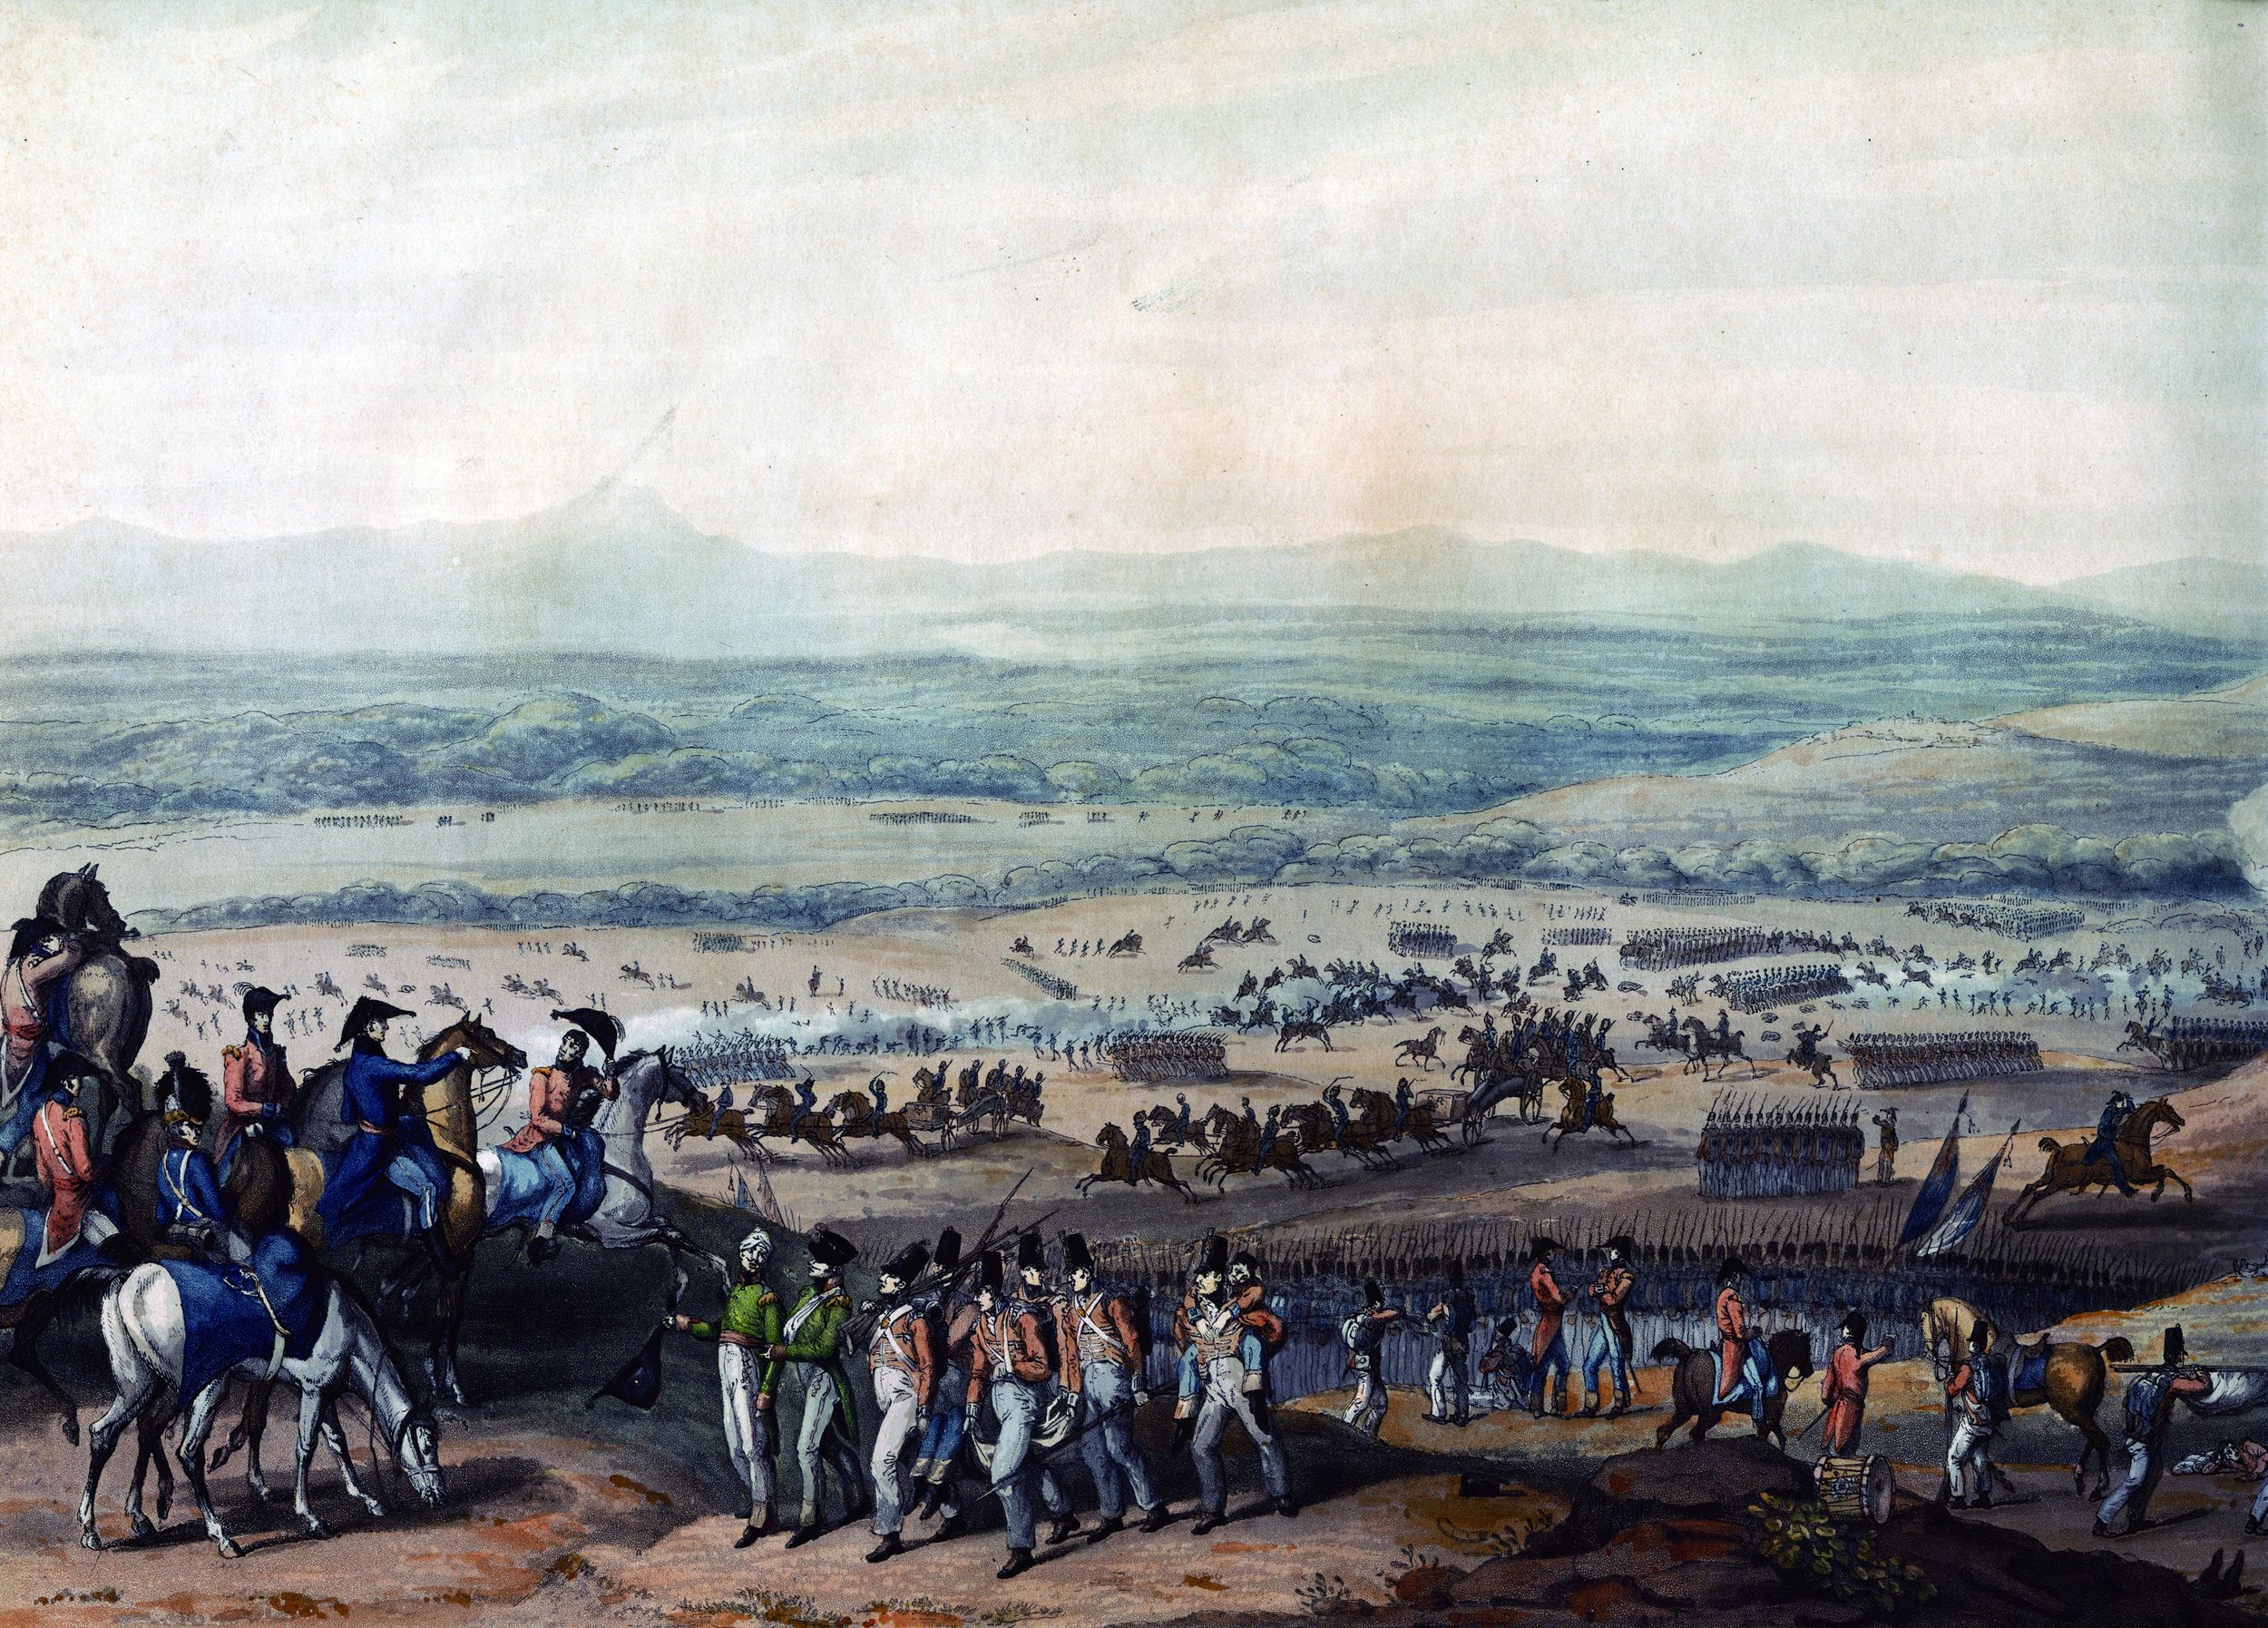 Wellington, mounted at left, calmly directs the British right flank at Fuentes de Onoro. The right was comprised of the 1st, 3rd, and 7th Divisions.